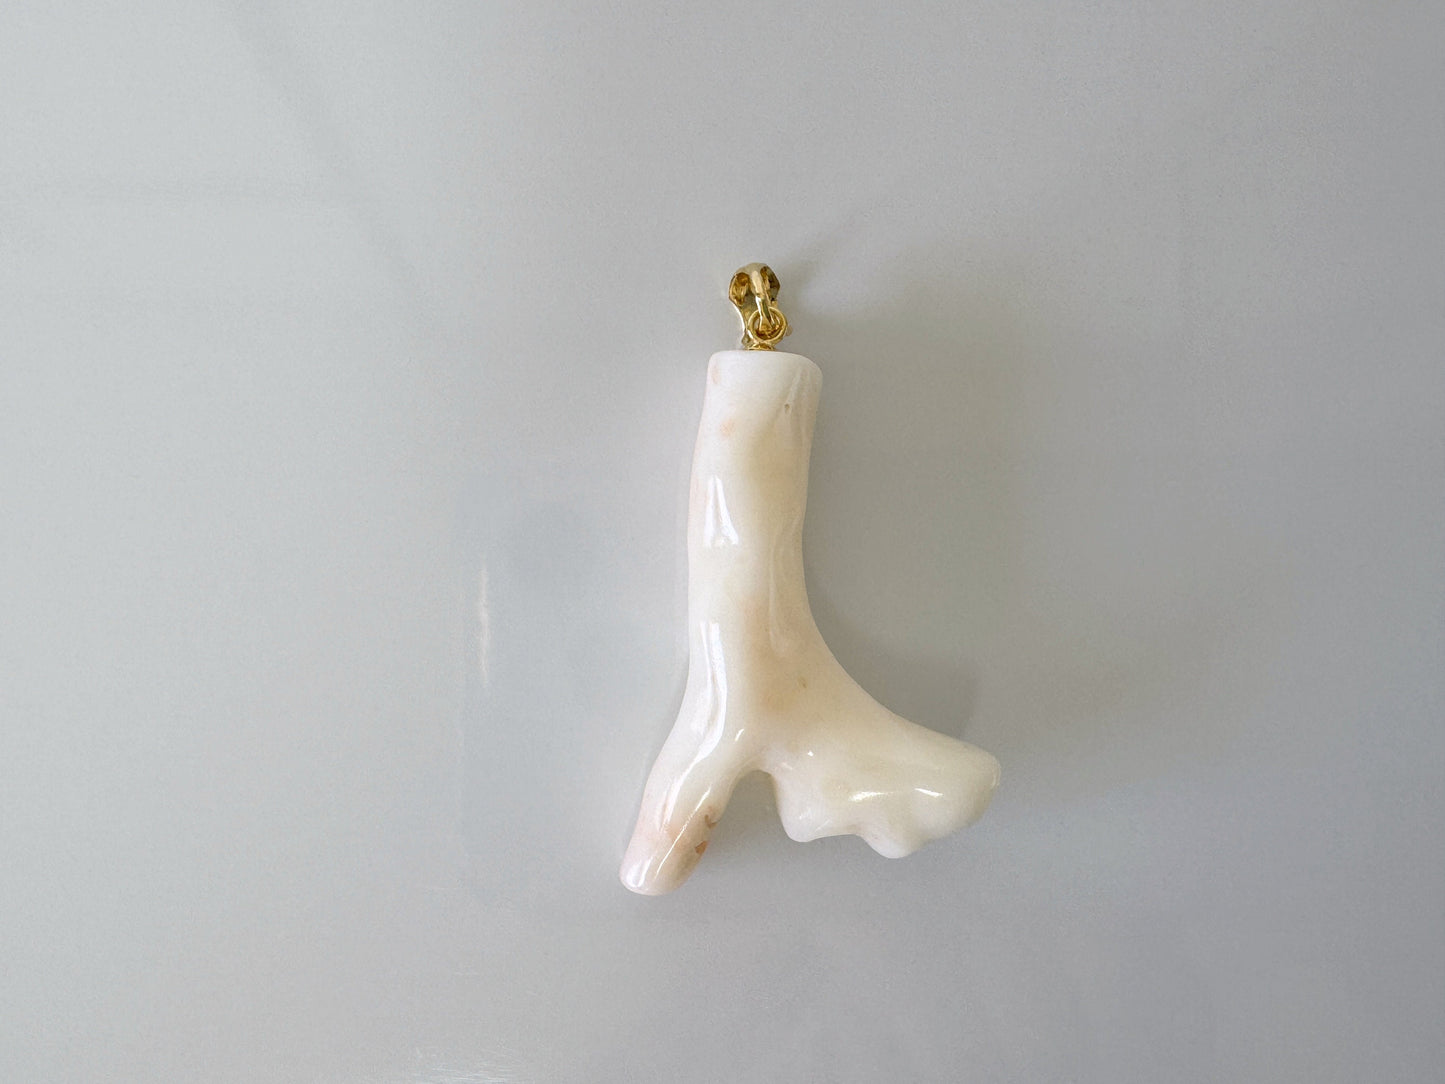 Natural White/Slightly orange Coral Branch Pendant, Natural color, Japanese White Precious Coral, Silver Bail (gold-plated)